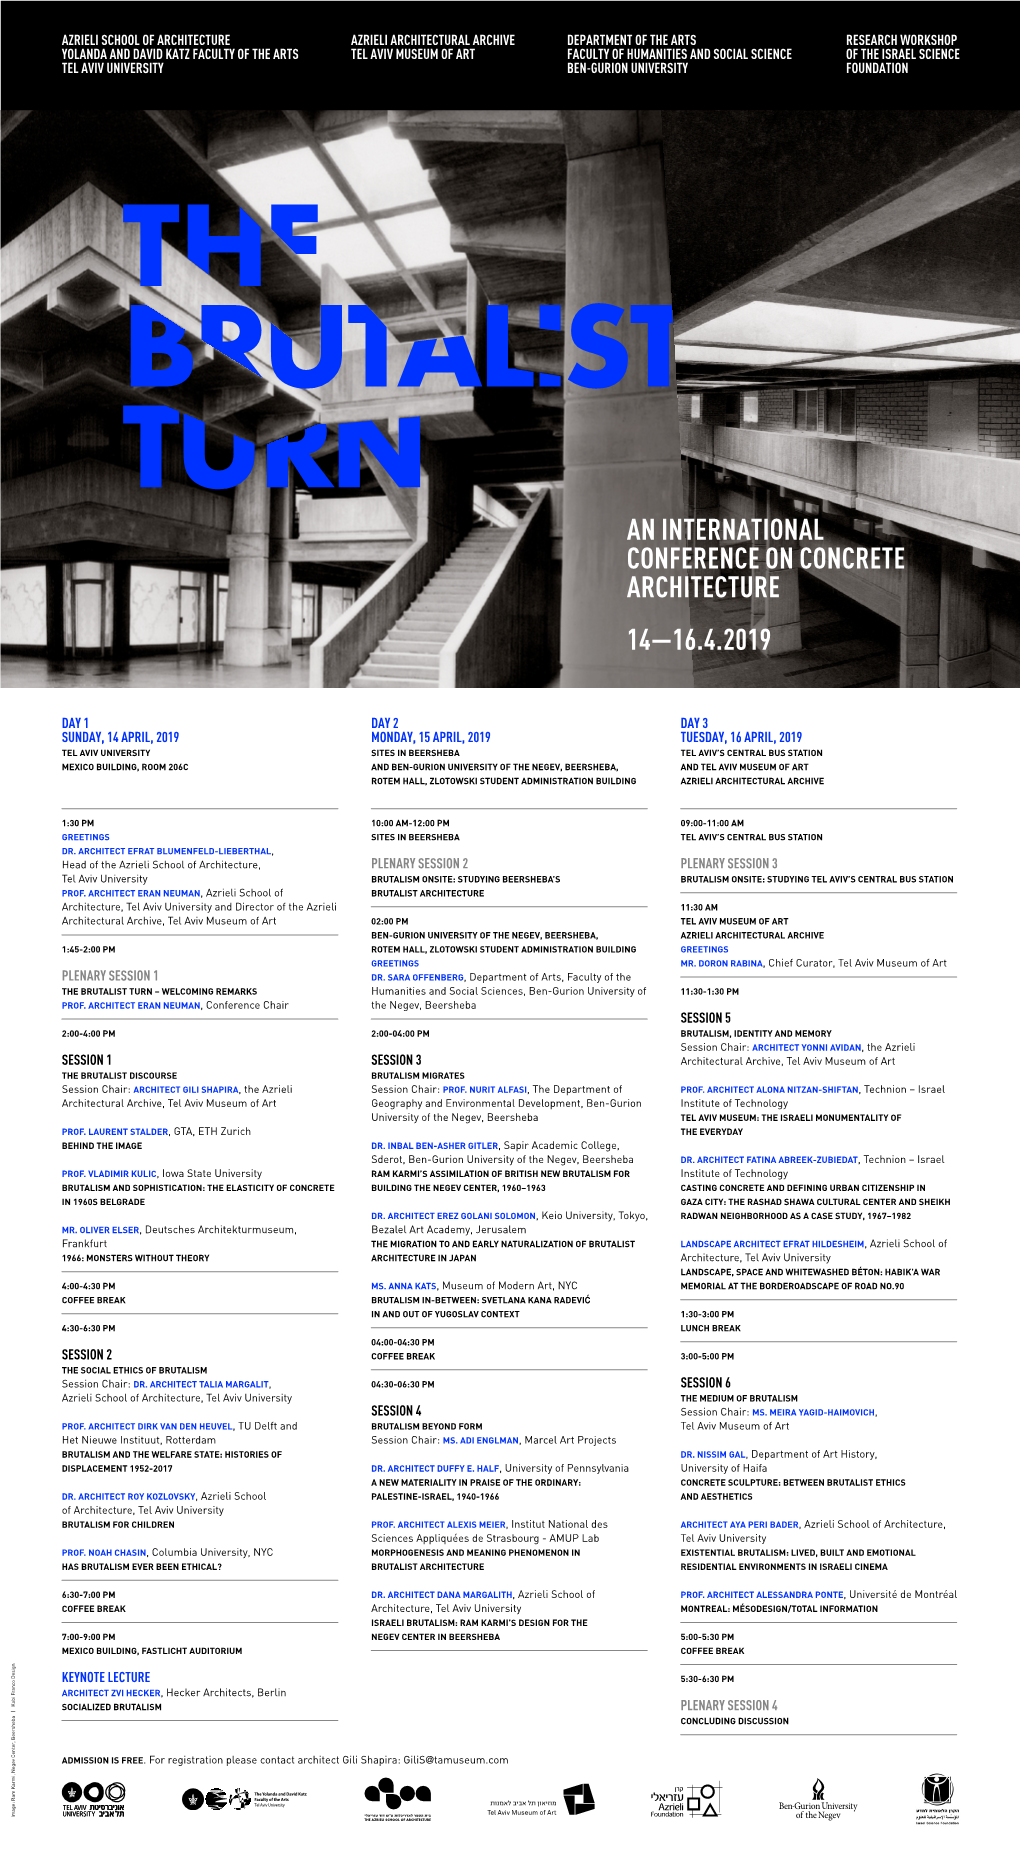 An International Conference on Concrete Architecture 14—16.4.2019